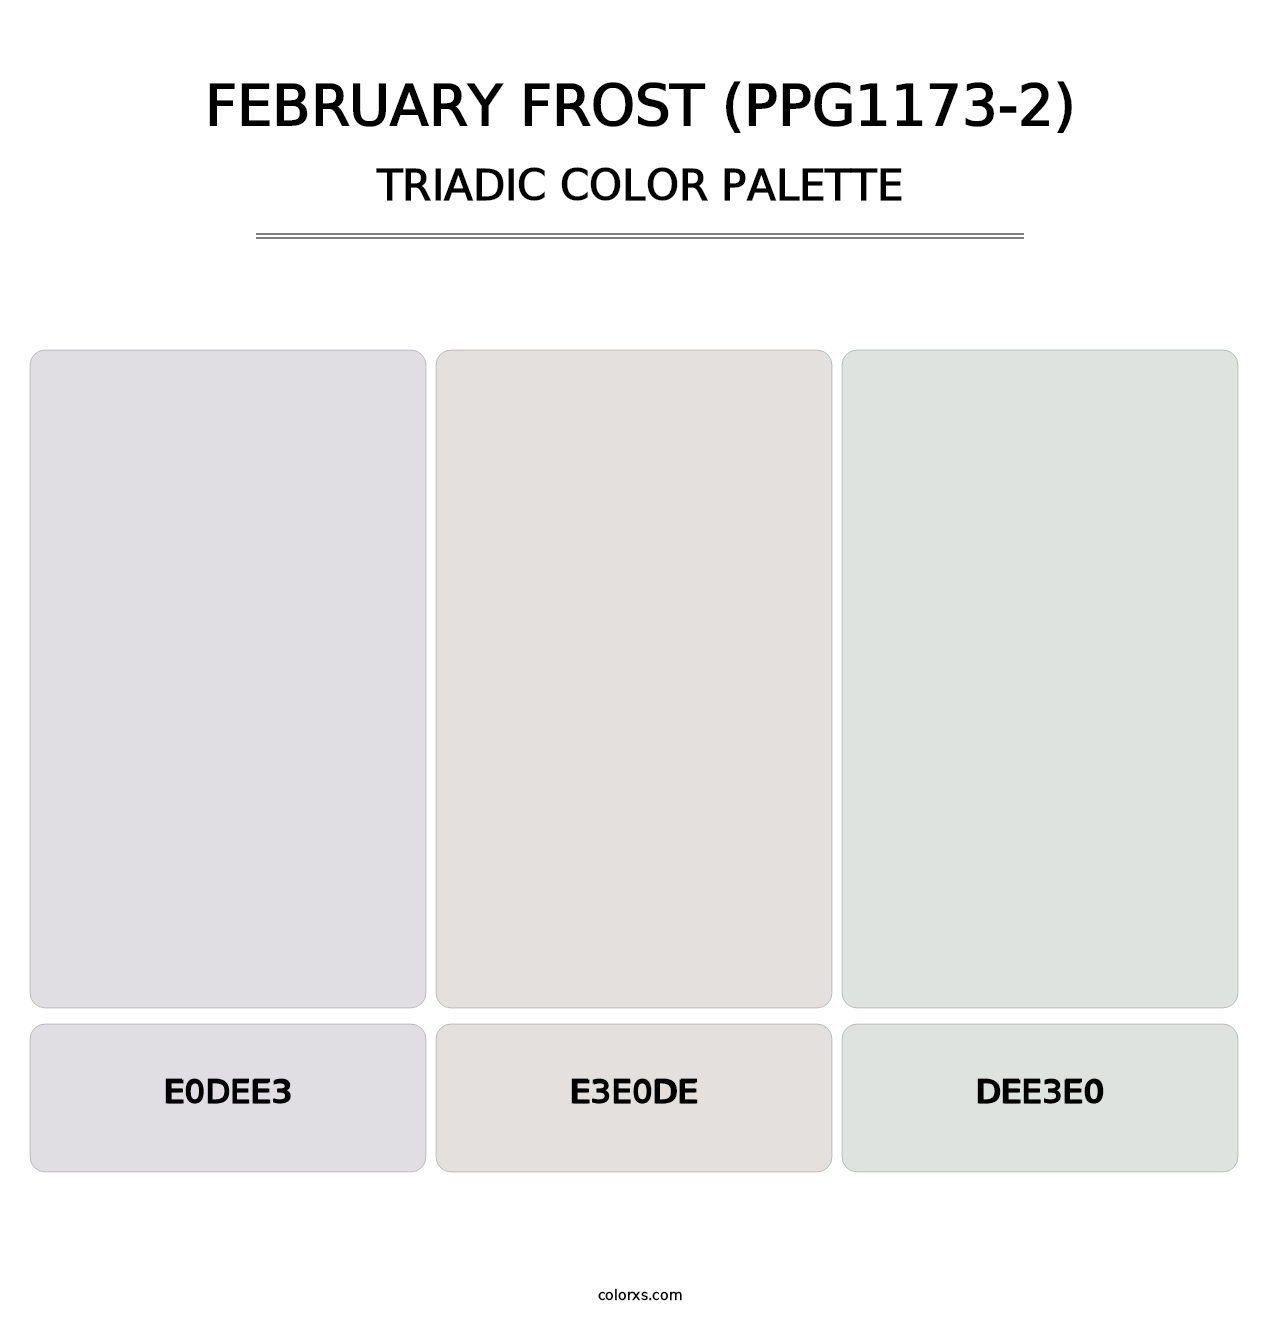 February Frost (PPG1173-2) - Triadic Color Palette